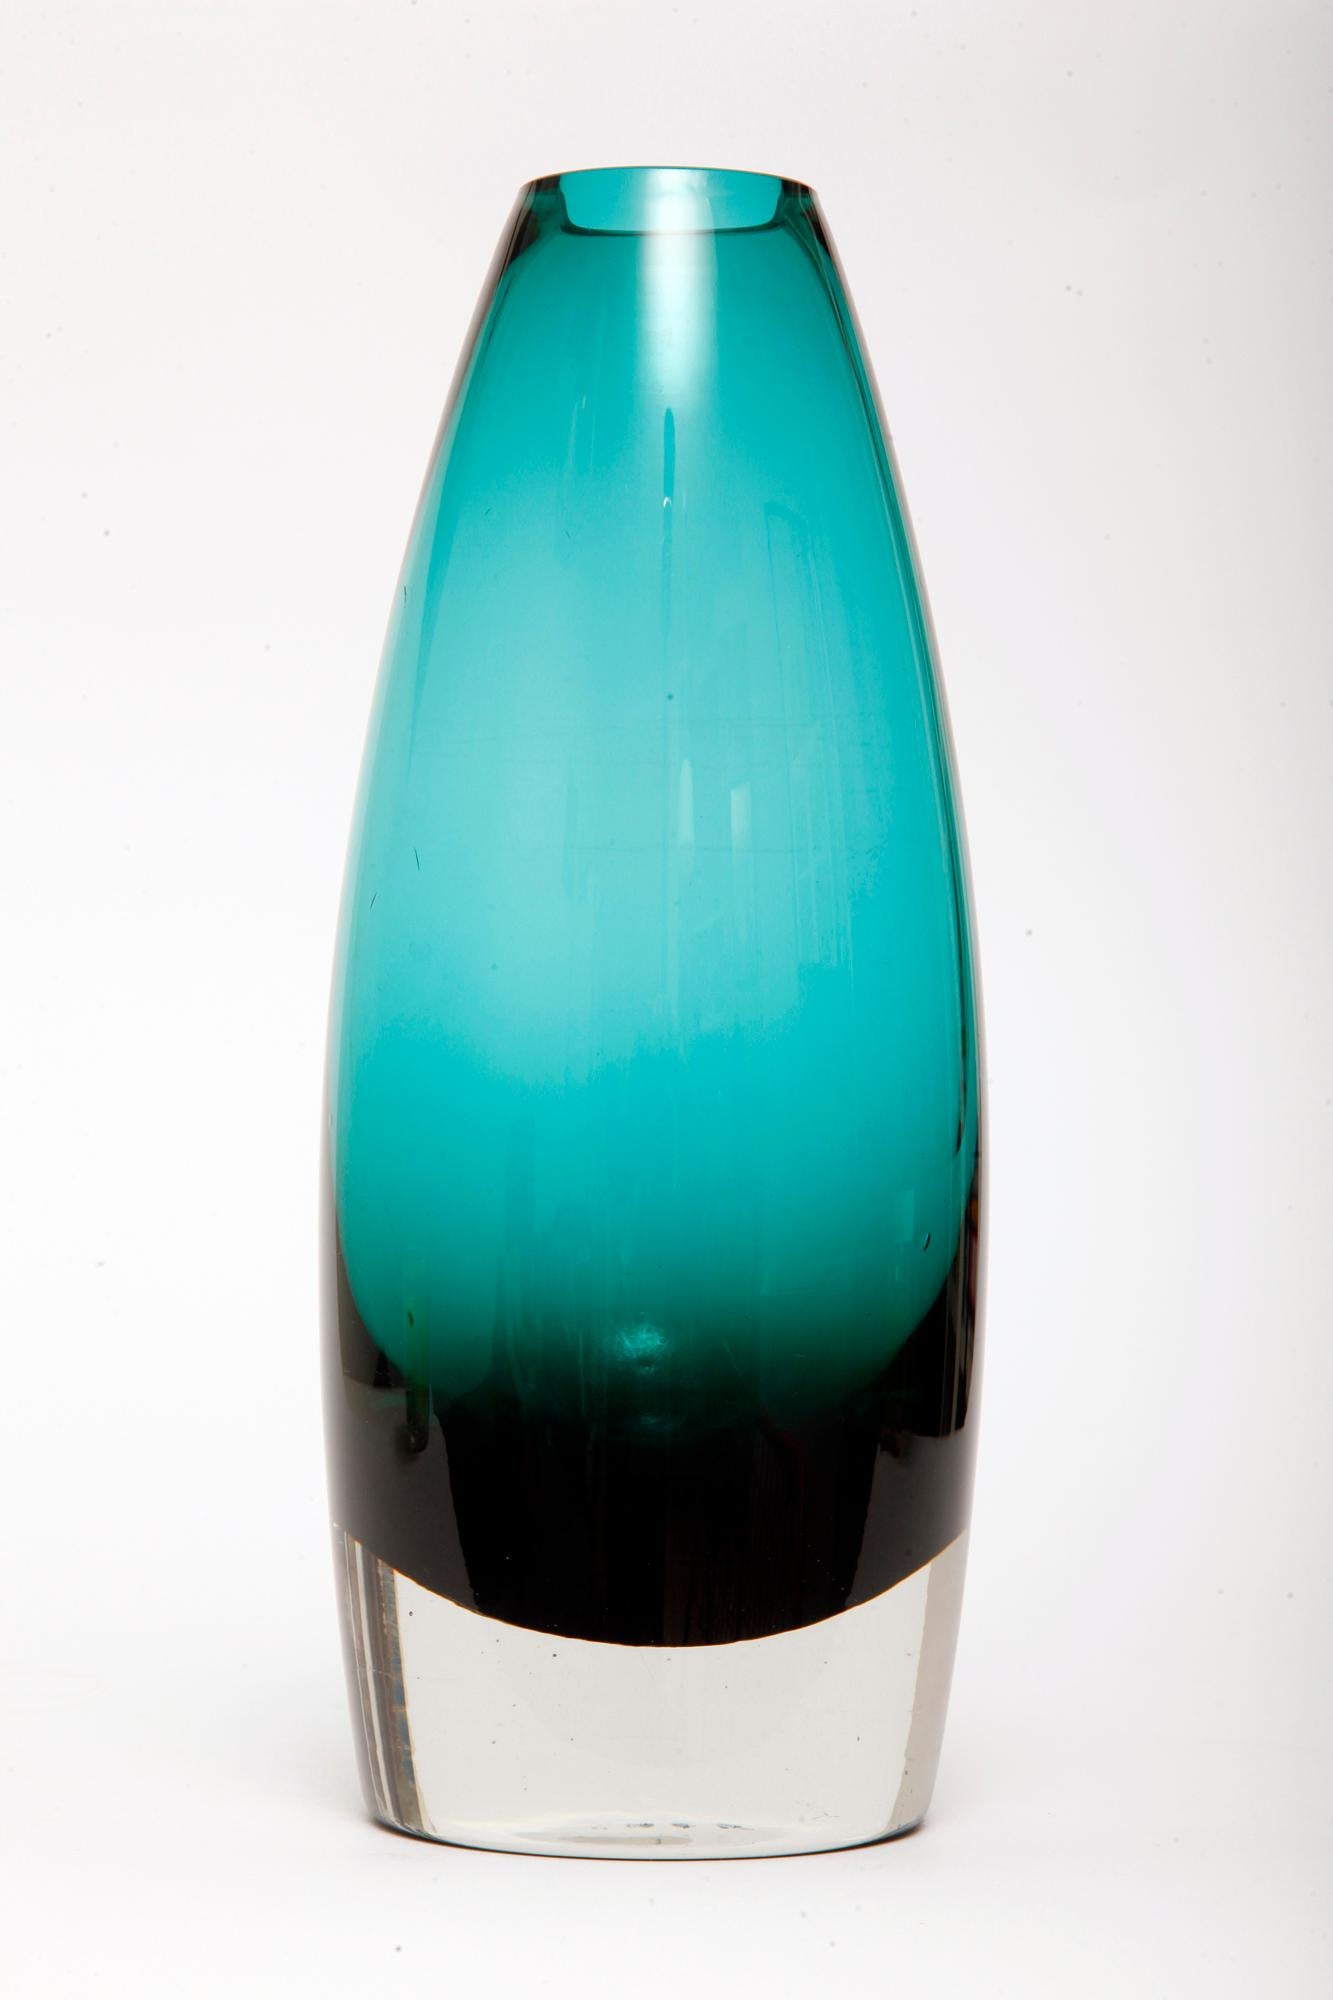 The perfect combination and color saturation, a wonderful contrast between the top and the bottom of the vase. Perfect symmetry.
The essence of modernism. Wonder.

This is a midcentury Scandinavian Modern, Art glass vase, attributed to the